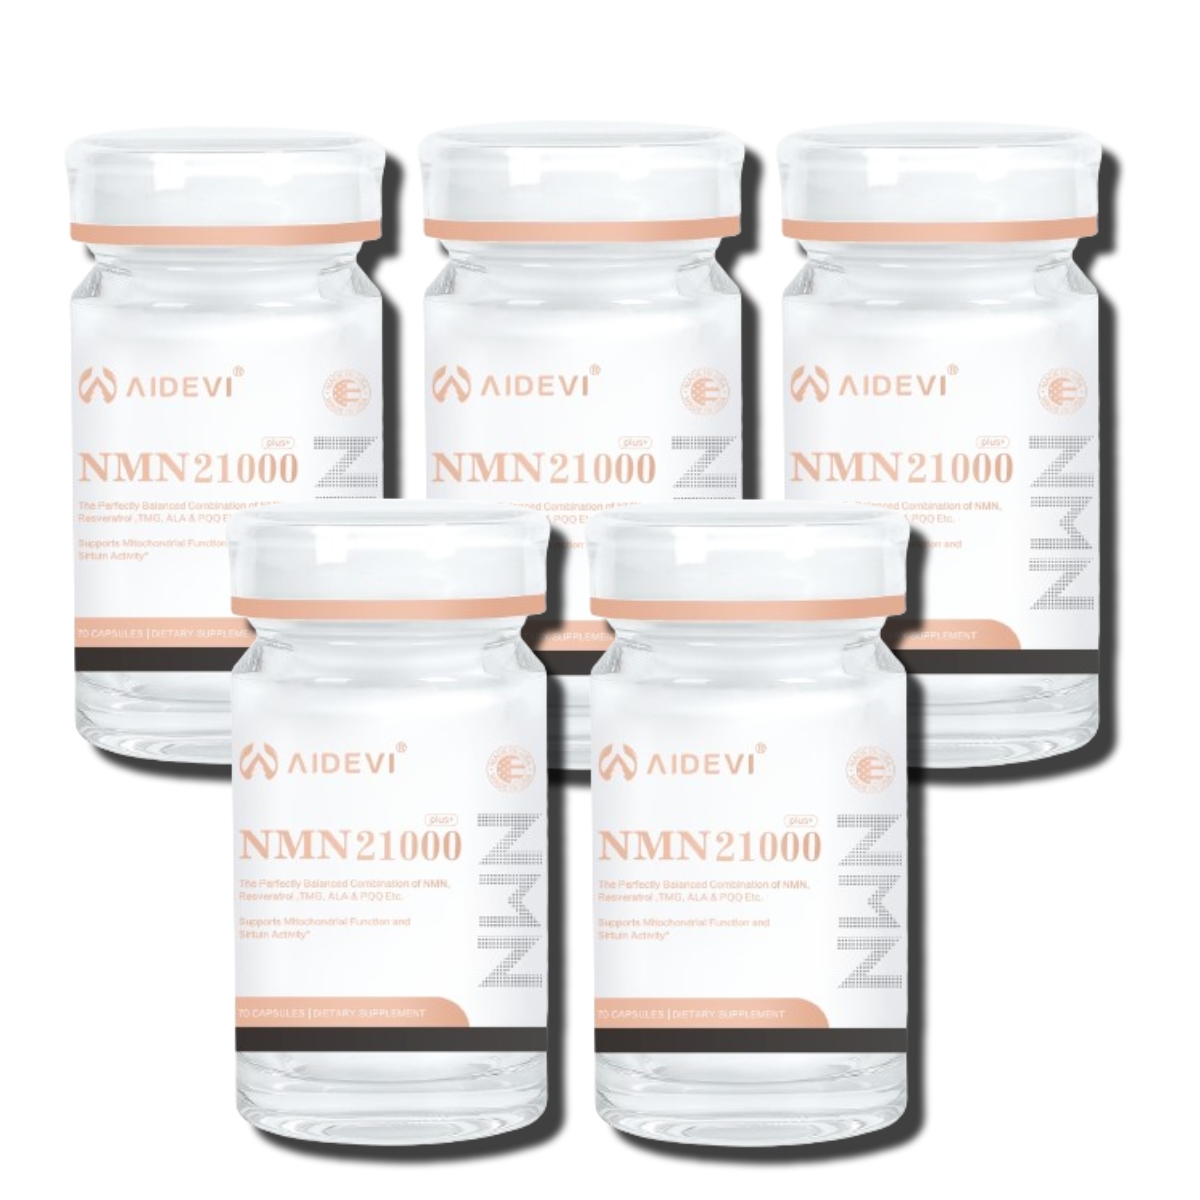 NMN21000 70 Capsules Supplements (Set of 5) -AIDEVI